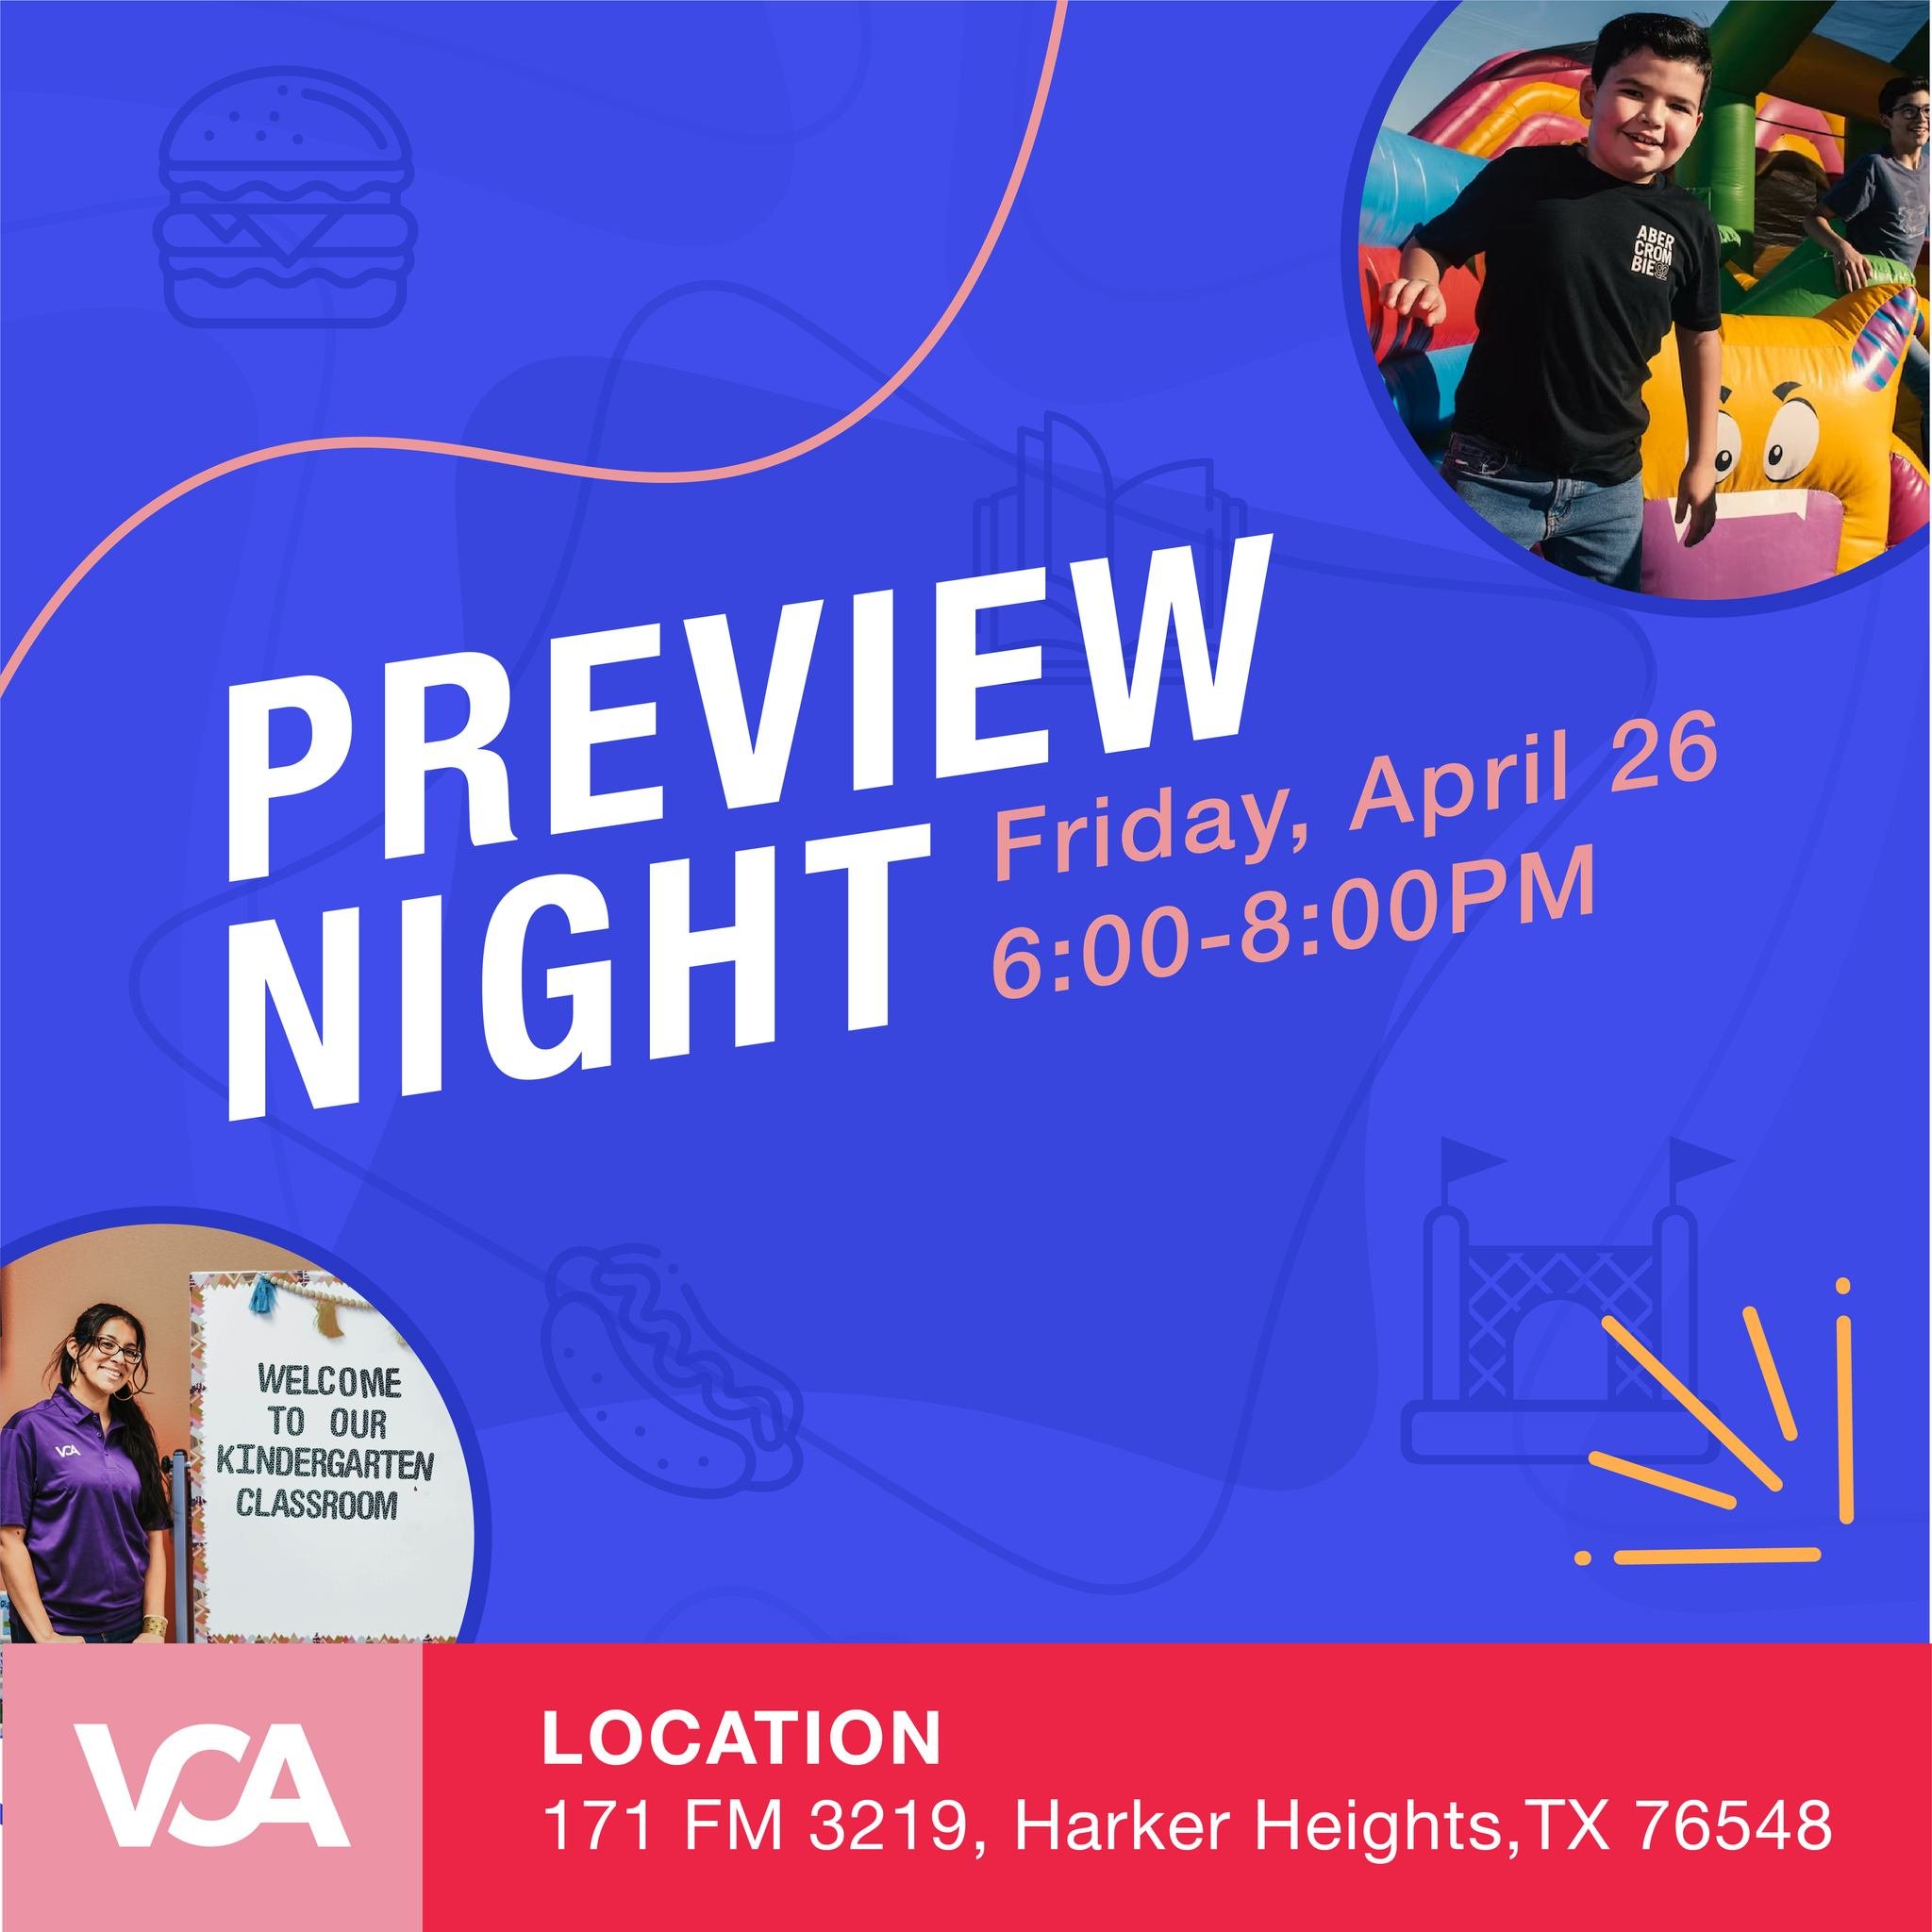 If you haven't checked out Vintage Christian Academy, YOU CAN NEXT FRIDAY NIGHT! We started VCA because we know parents are looking for options in education. If you desire &quot;a Christian classical alternative to public education and secular indoct